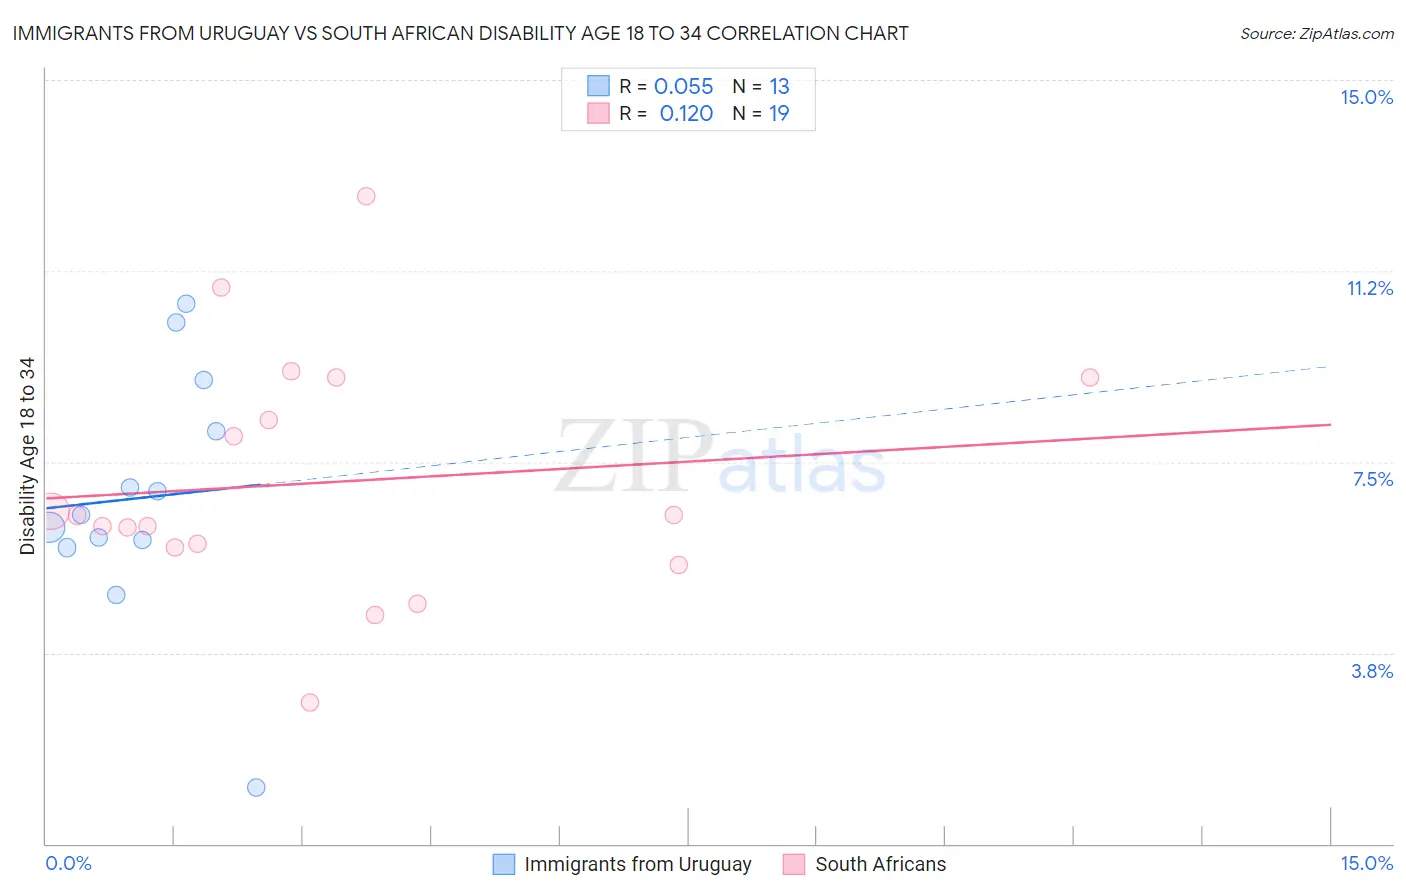 Immigrants from Uruguay vs South African Disability Age 18 to 34